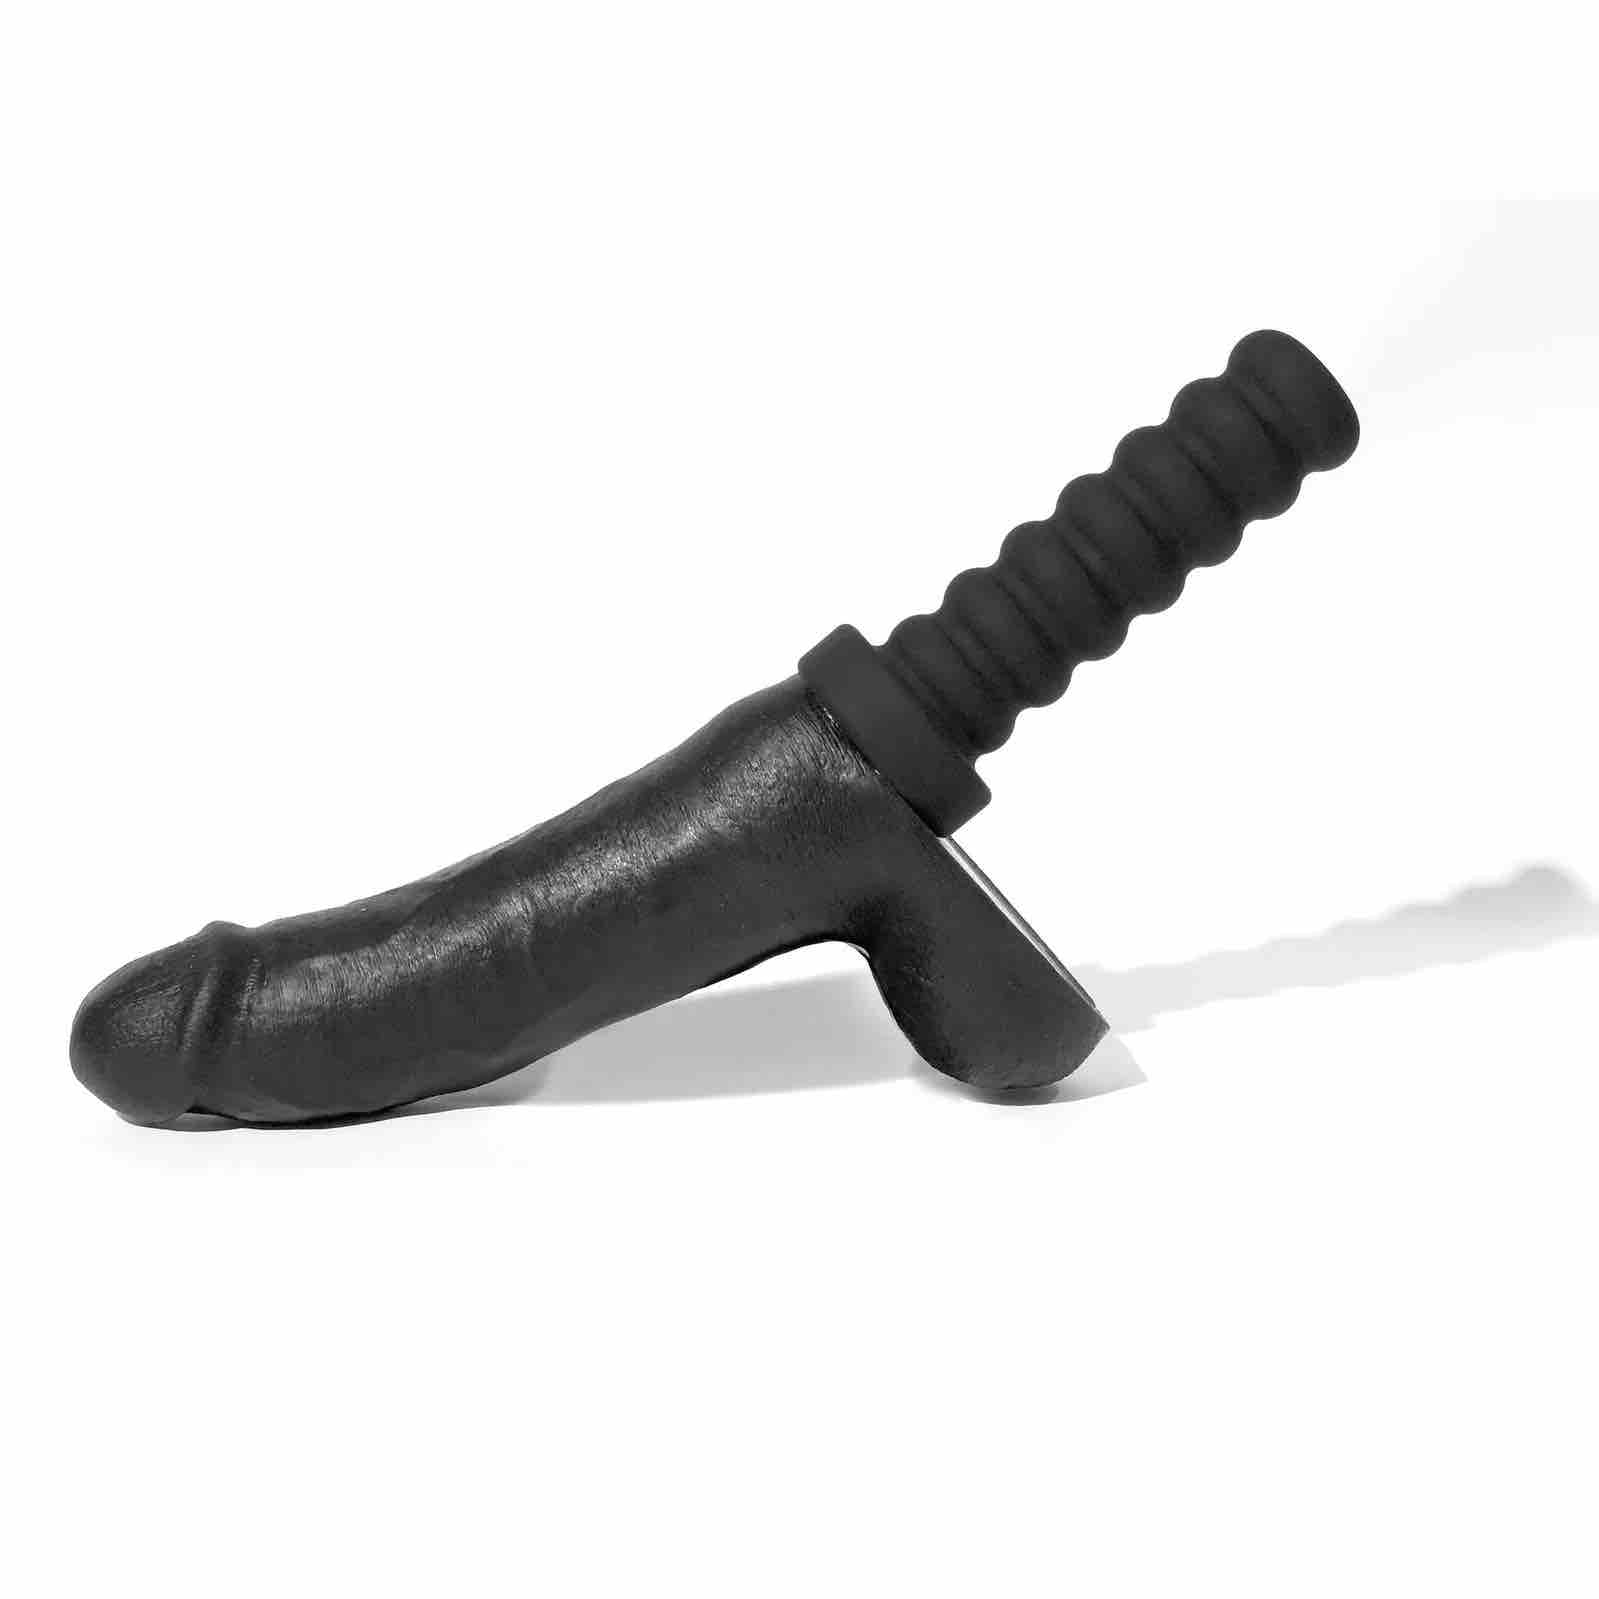 The 8 inch Boneyard Silicone Cock with its handle attqched.